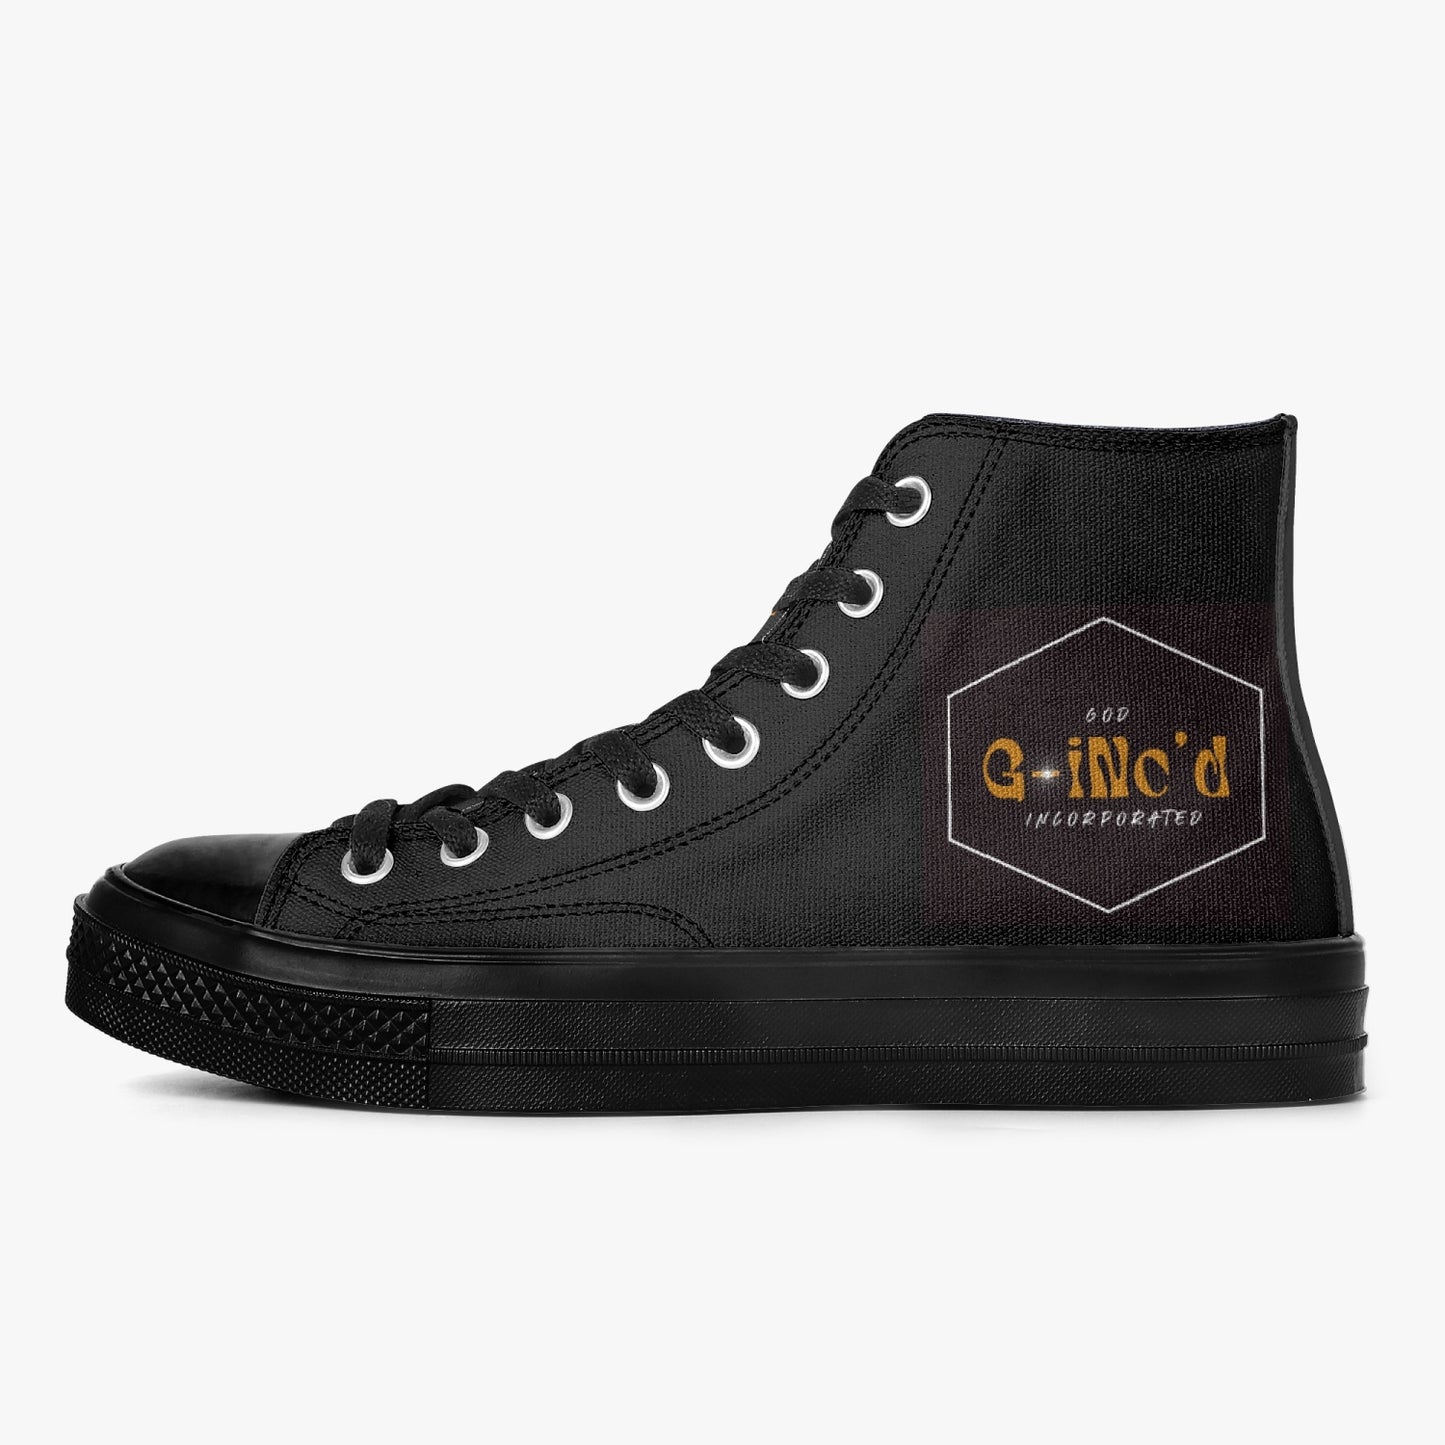 Unisex New High-Top Canvas Shoes - Black